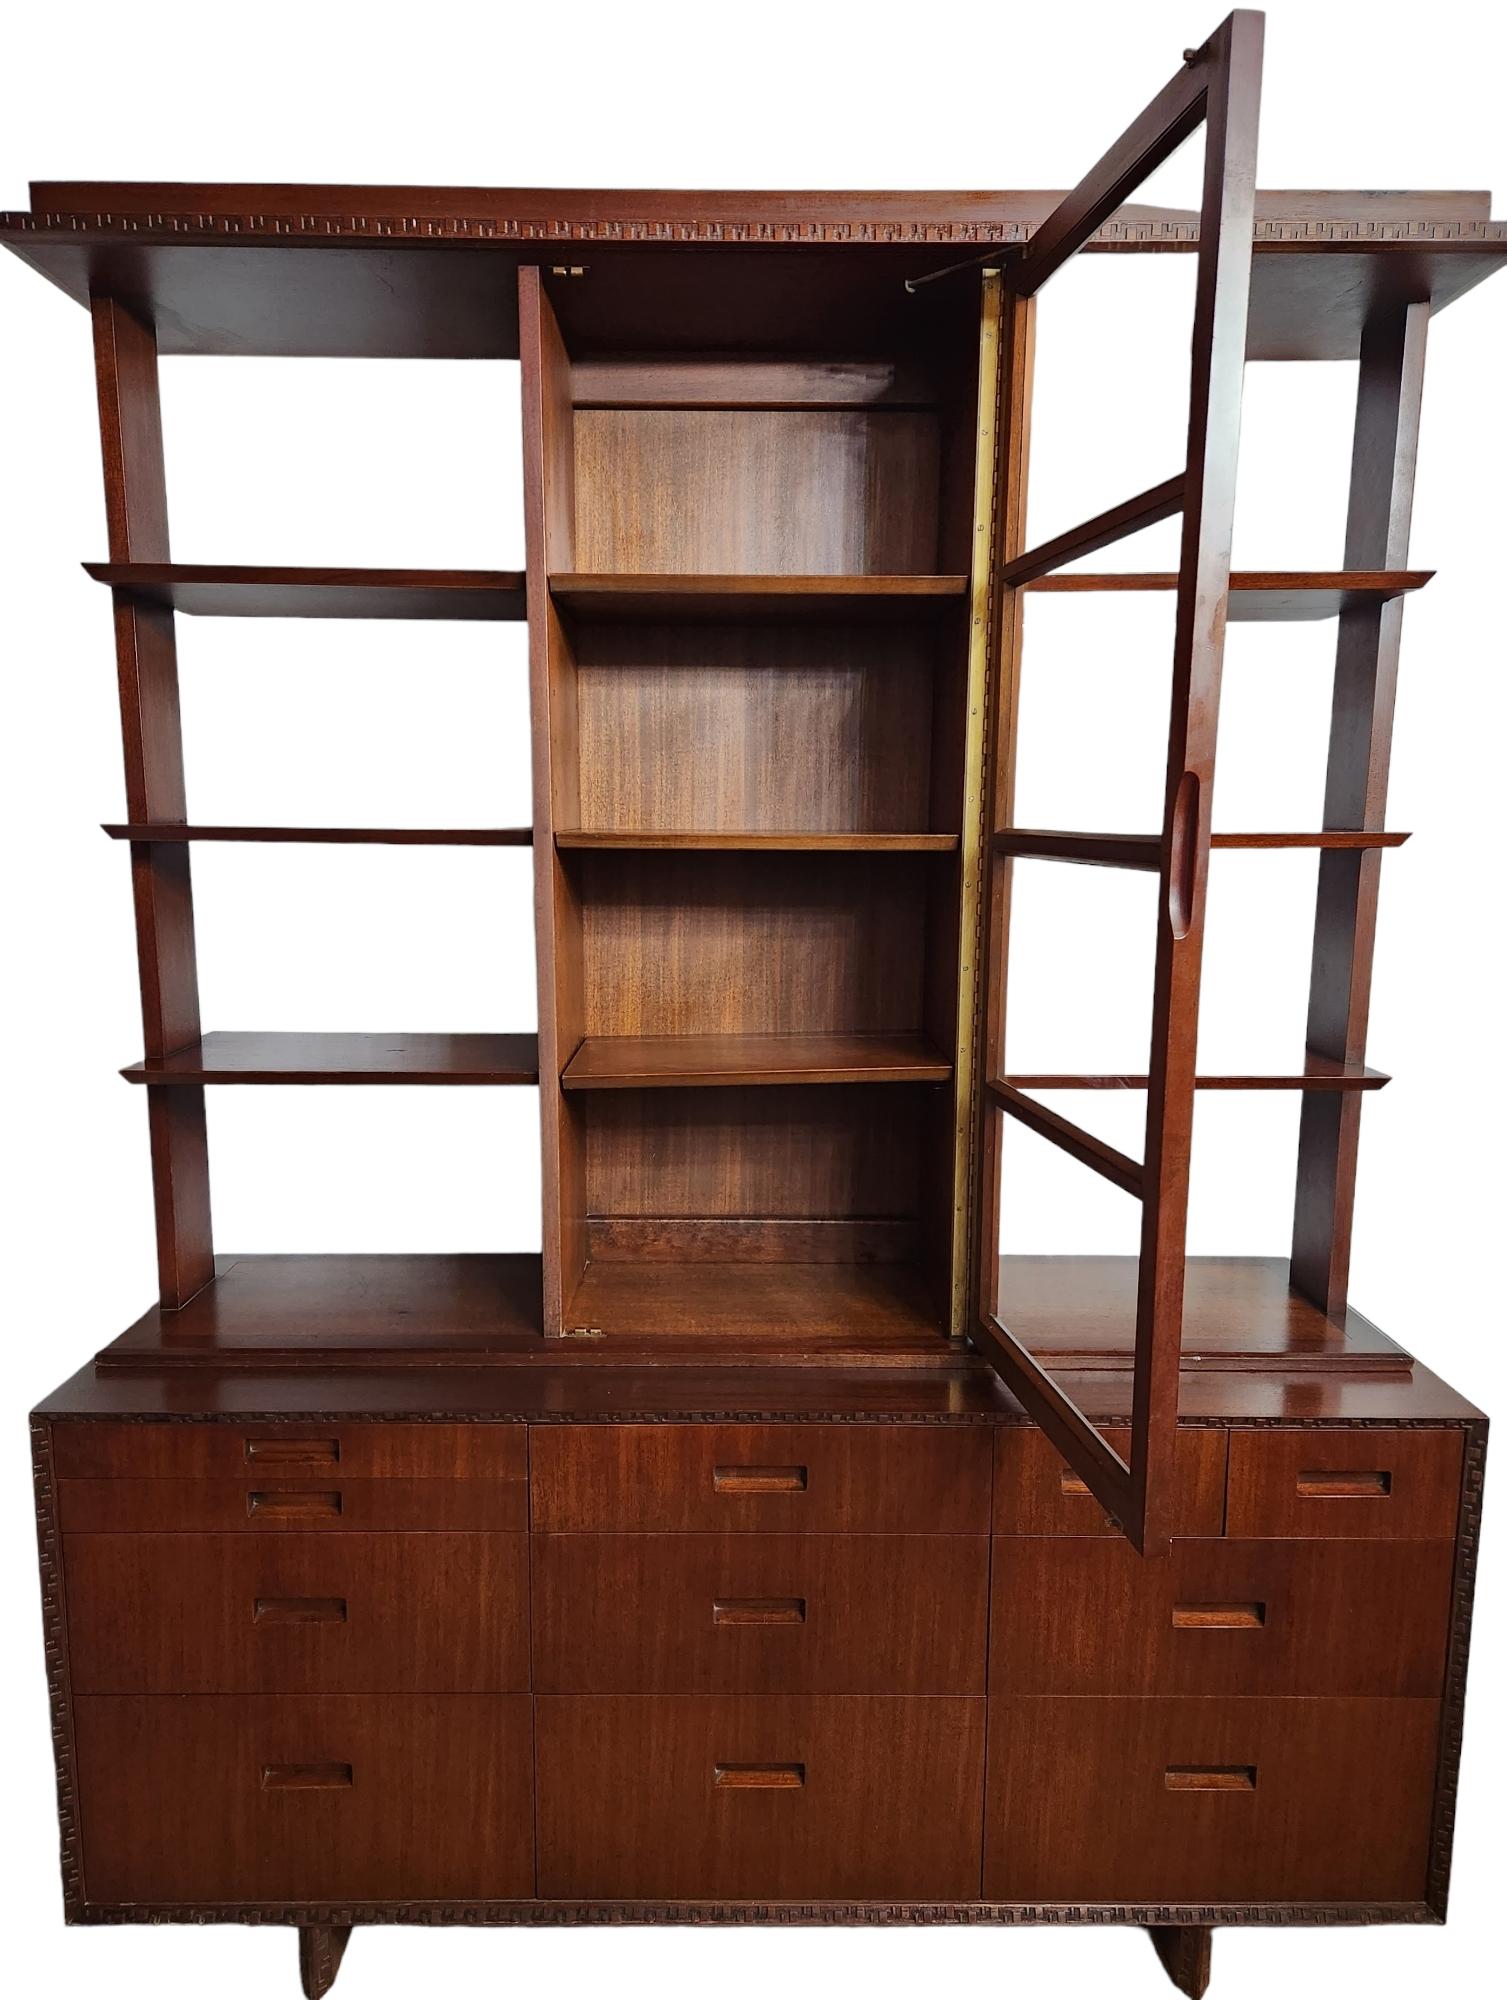 Beautiful mahogany sideboard / china closet designed by Frank Lloyd Wright for Heritage Henredon in 1955 as part of his Taliesin line.
The right upper corner drawer is stamped on the inside with Heritage- Henredon trademark and Frank Lloyd Wright's